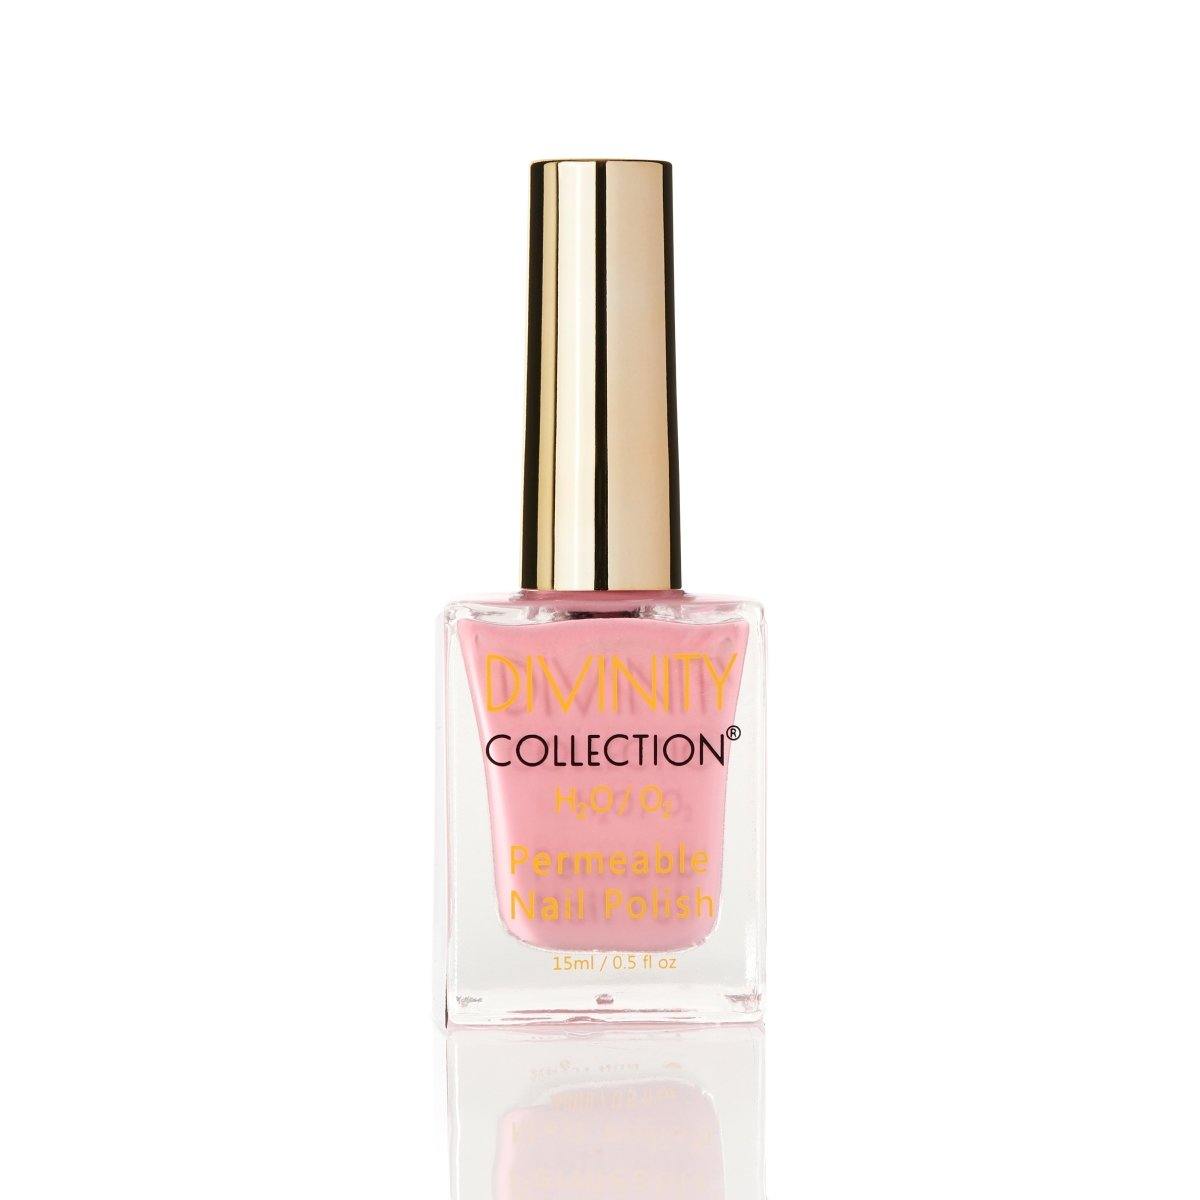 Divinity Collection Permeable Halal Nail Polish - Posh Pink - Divinity Collection